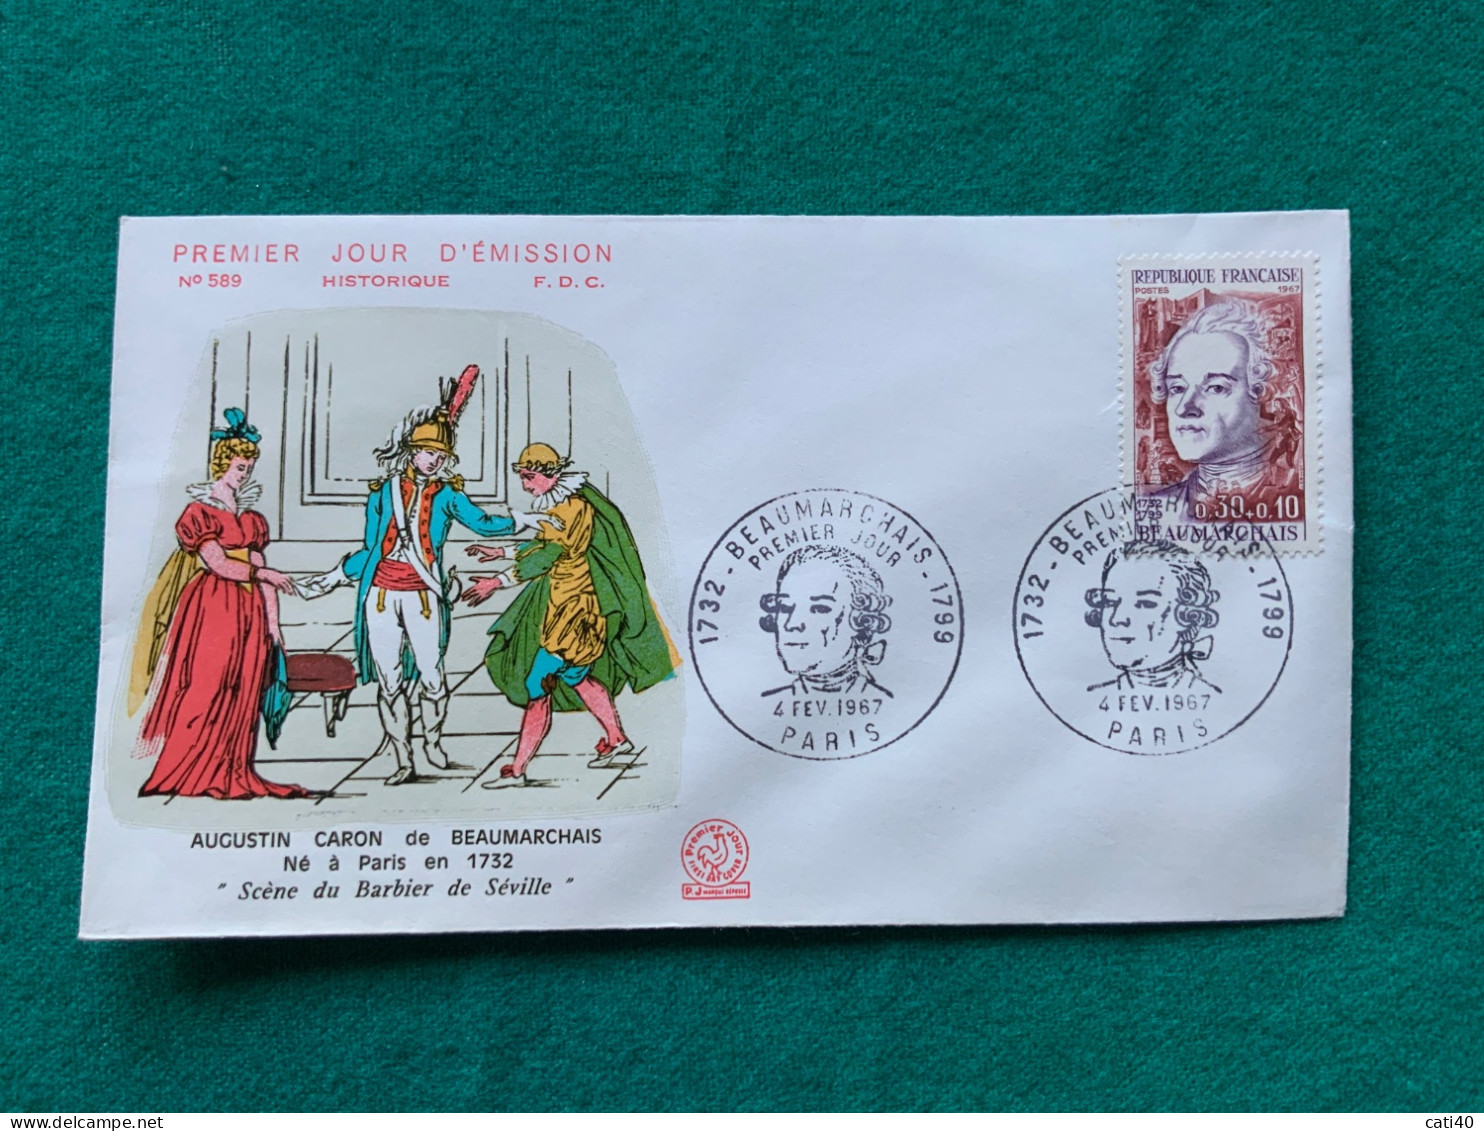 FRANCIA - BEAUMARCHAIS  -   FDC 1967 - Covers & Documents